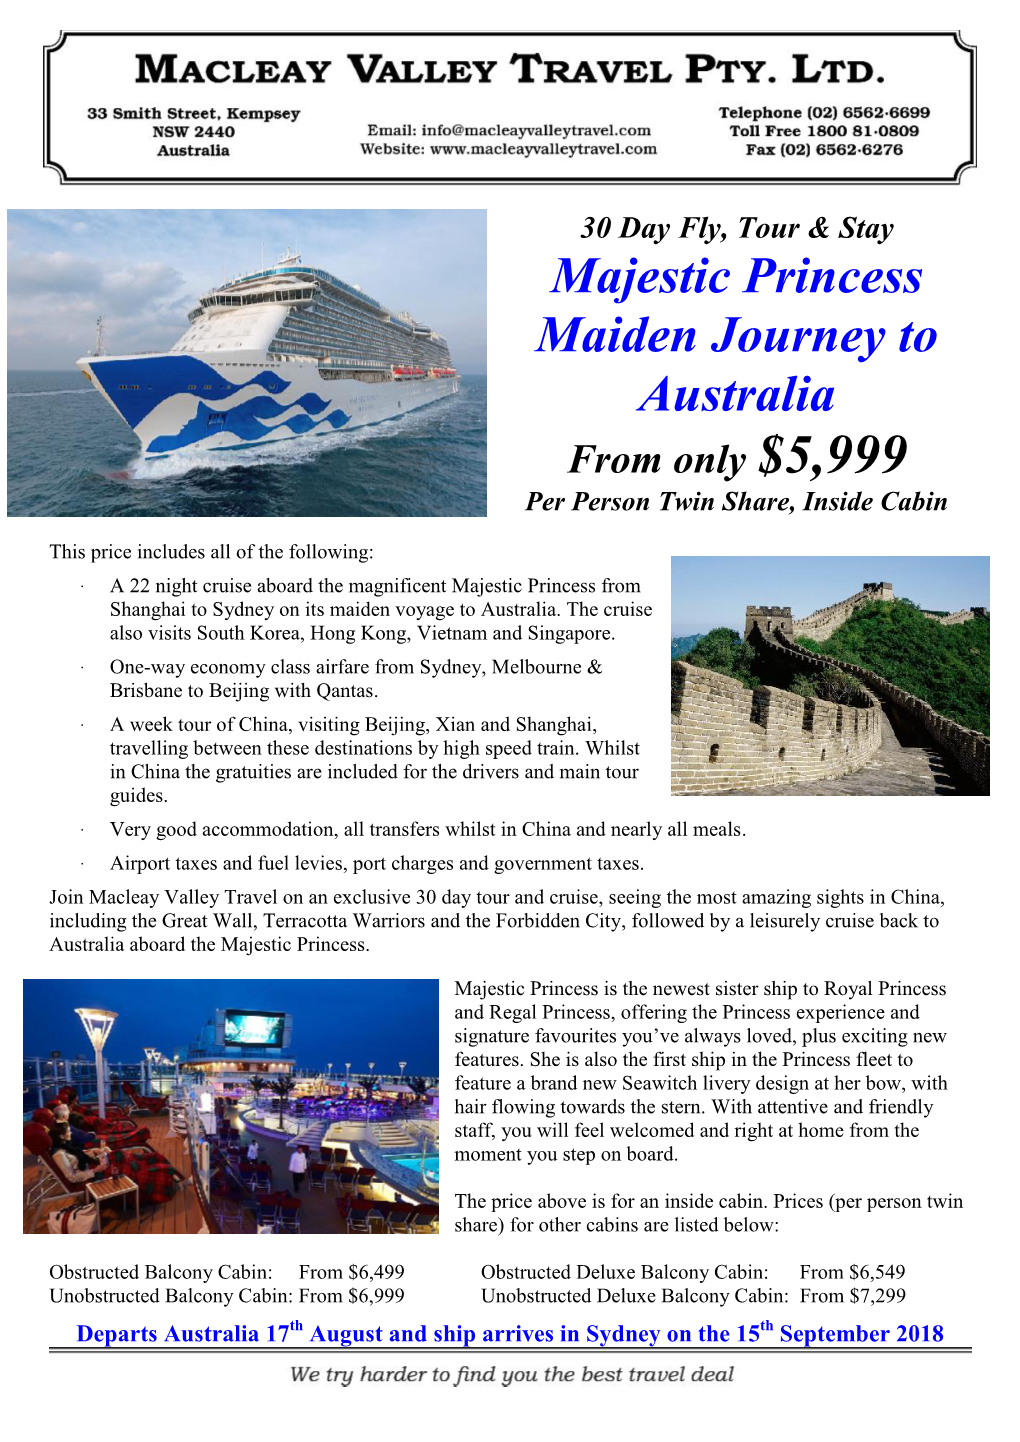 Majestic Princess Maiden Journey to Australia from Only $5,999 Per Person Twin Share, Inside Cabin